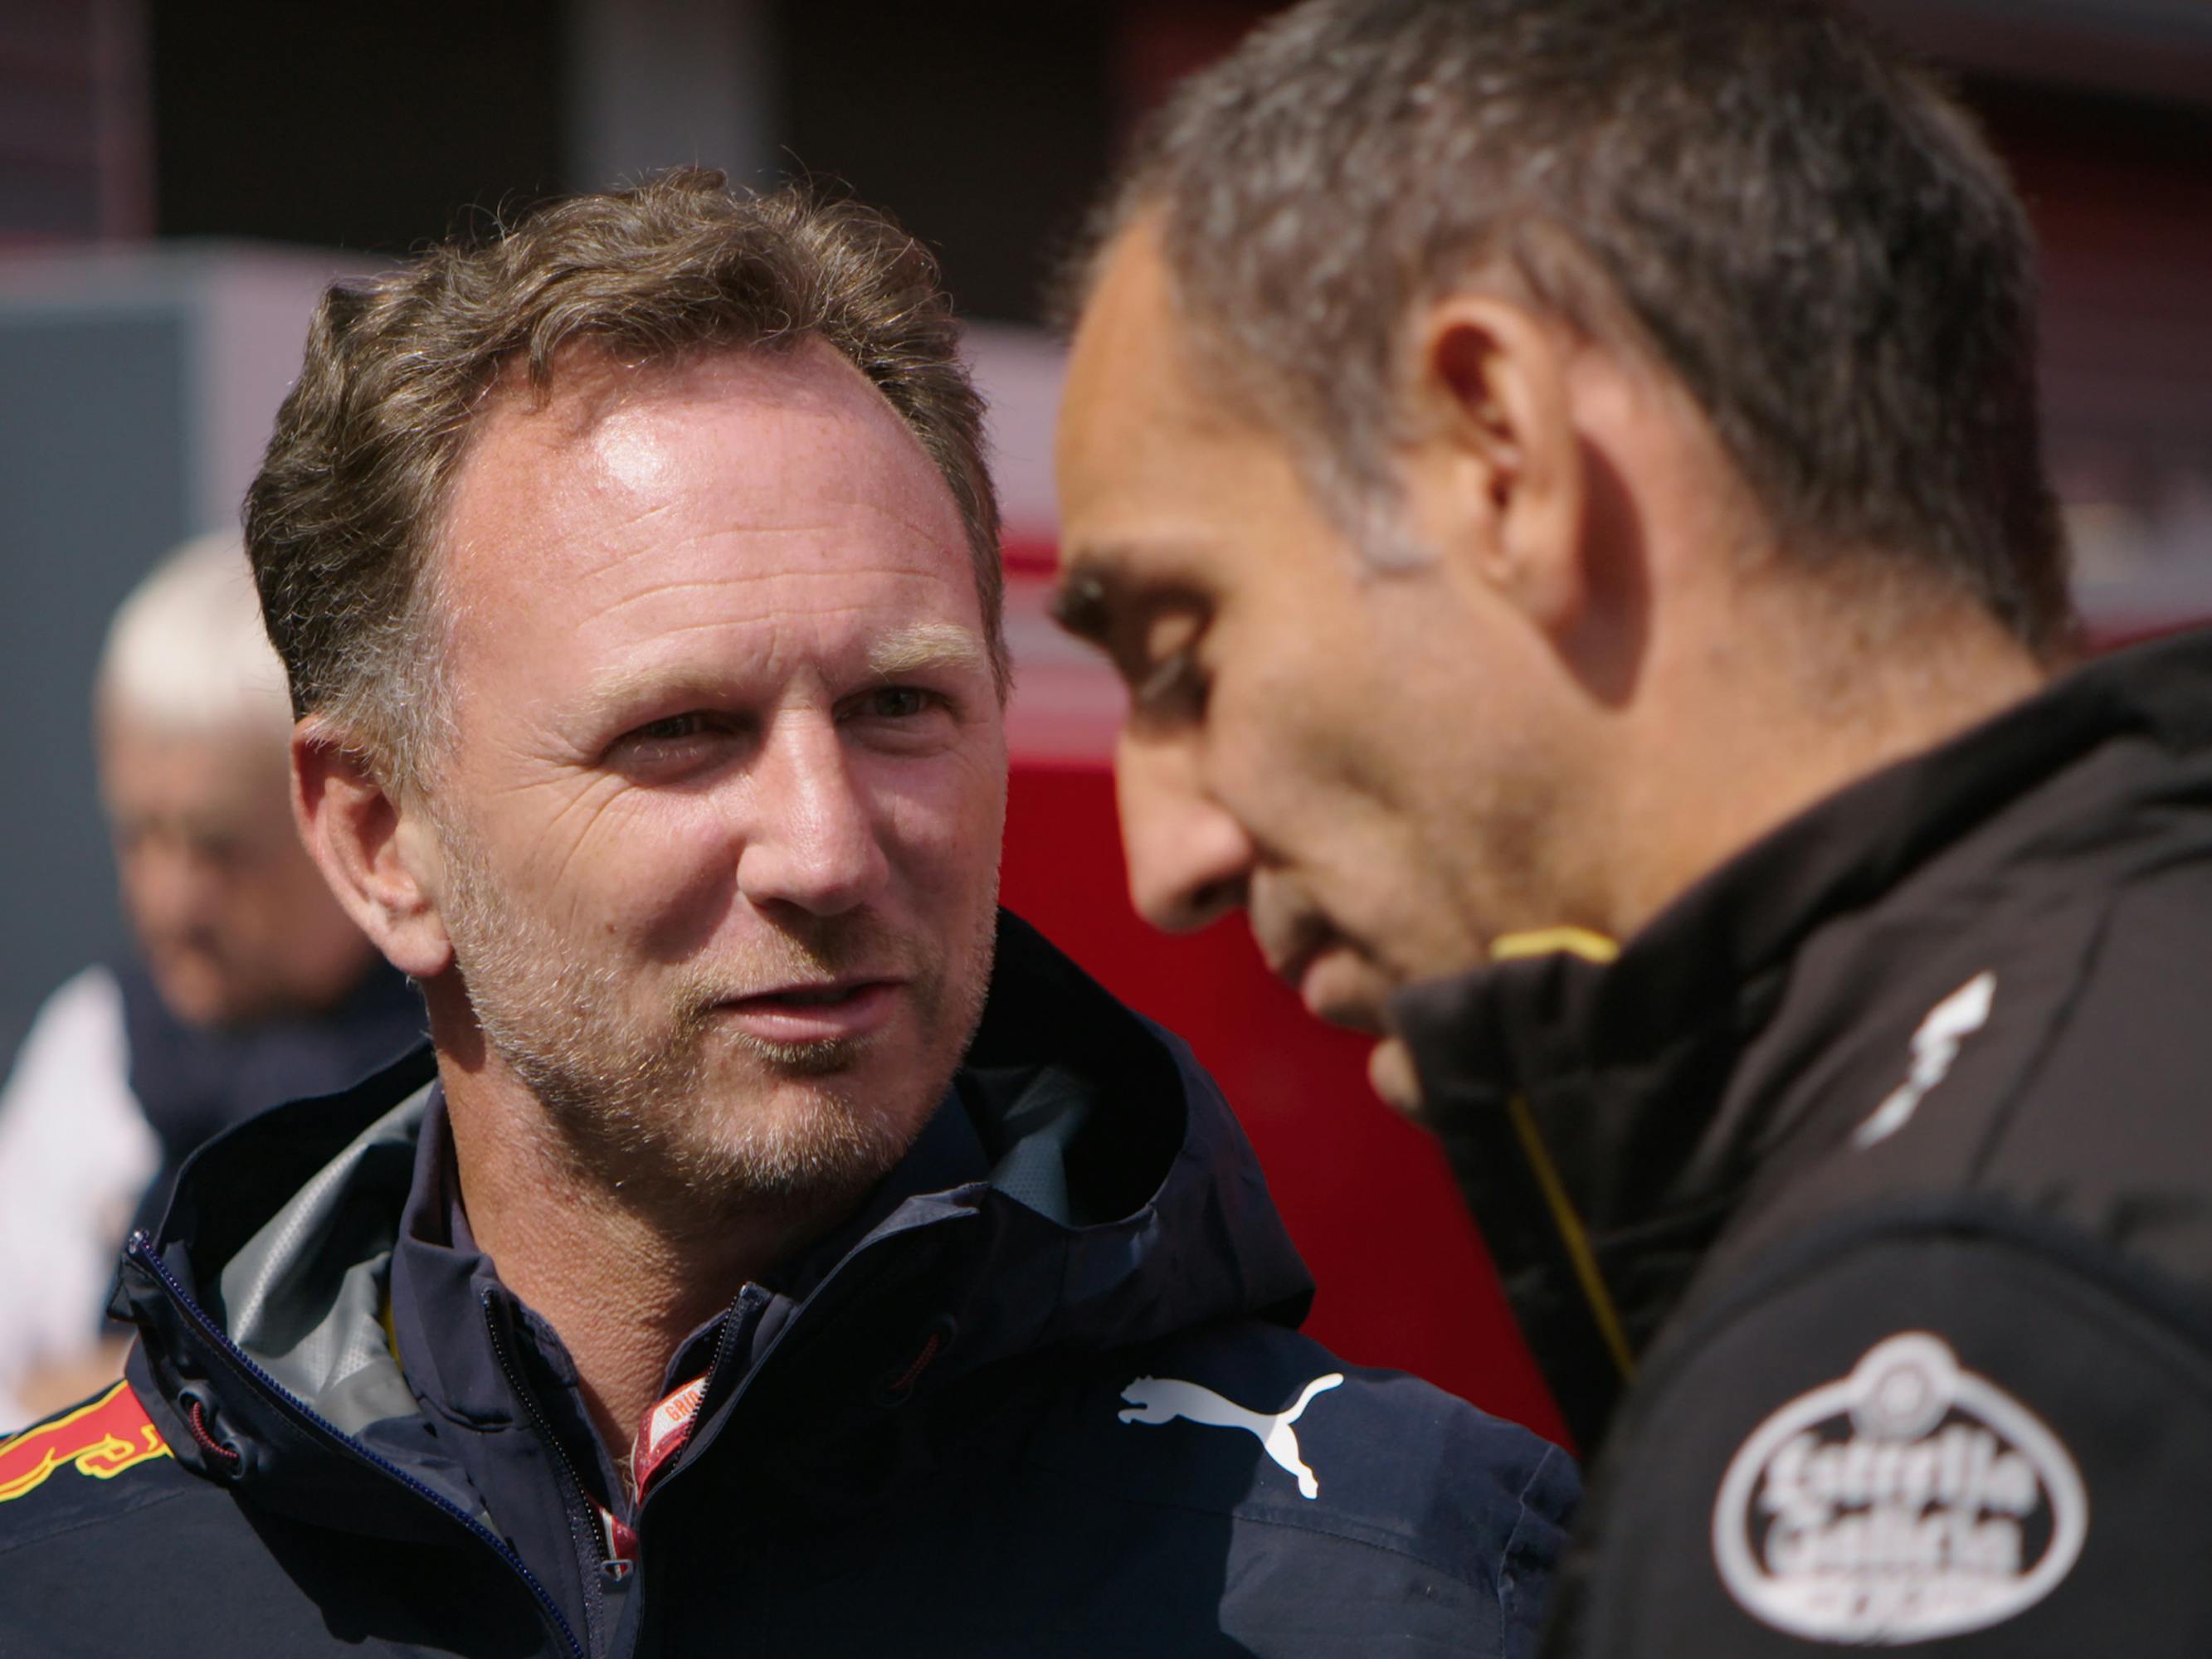 Christian Horner on the left looks over to Cyril Abiteboul who is in profile in the foreground.